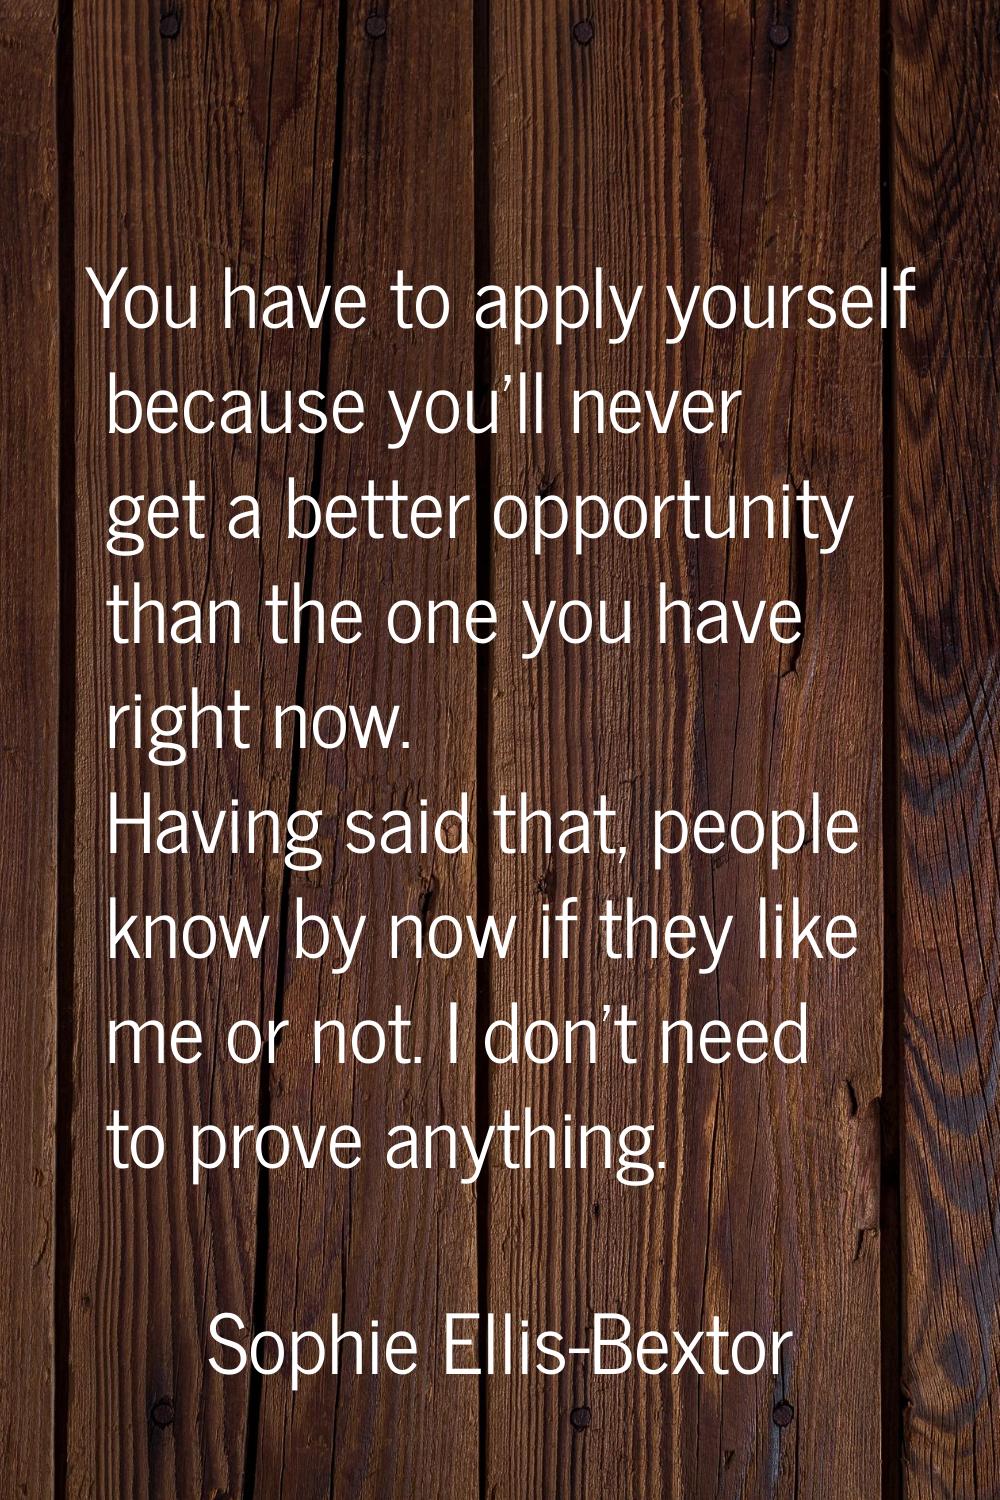 You have to apply yourself because you'll never get a better opportunity than the one you have righ